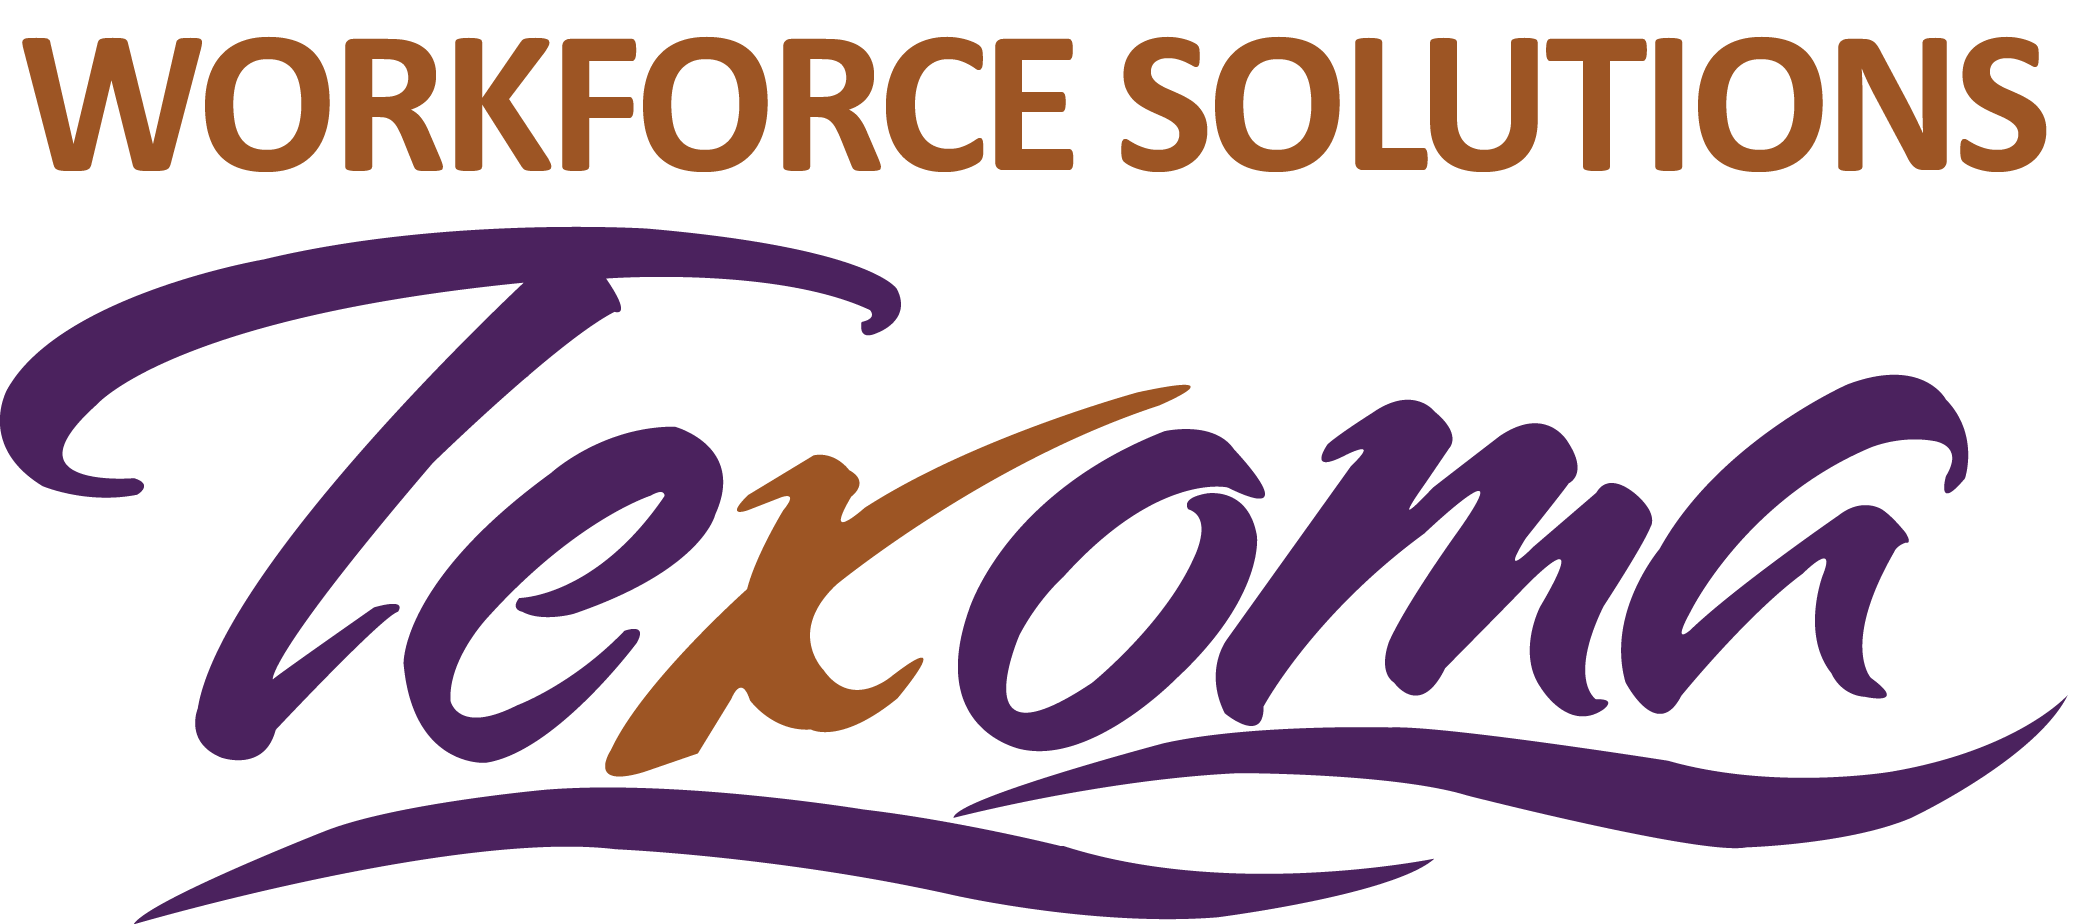 Workforce Solutions Texoma's Image